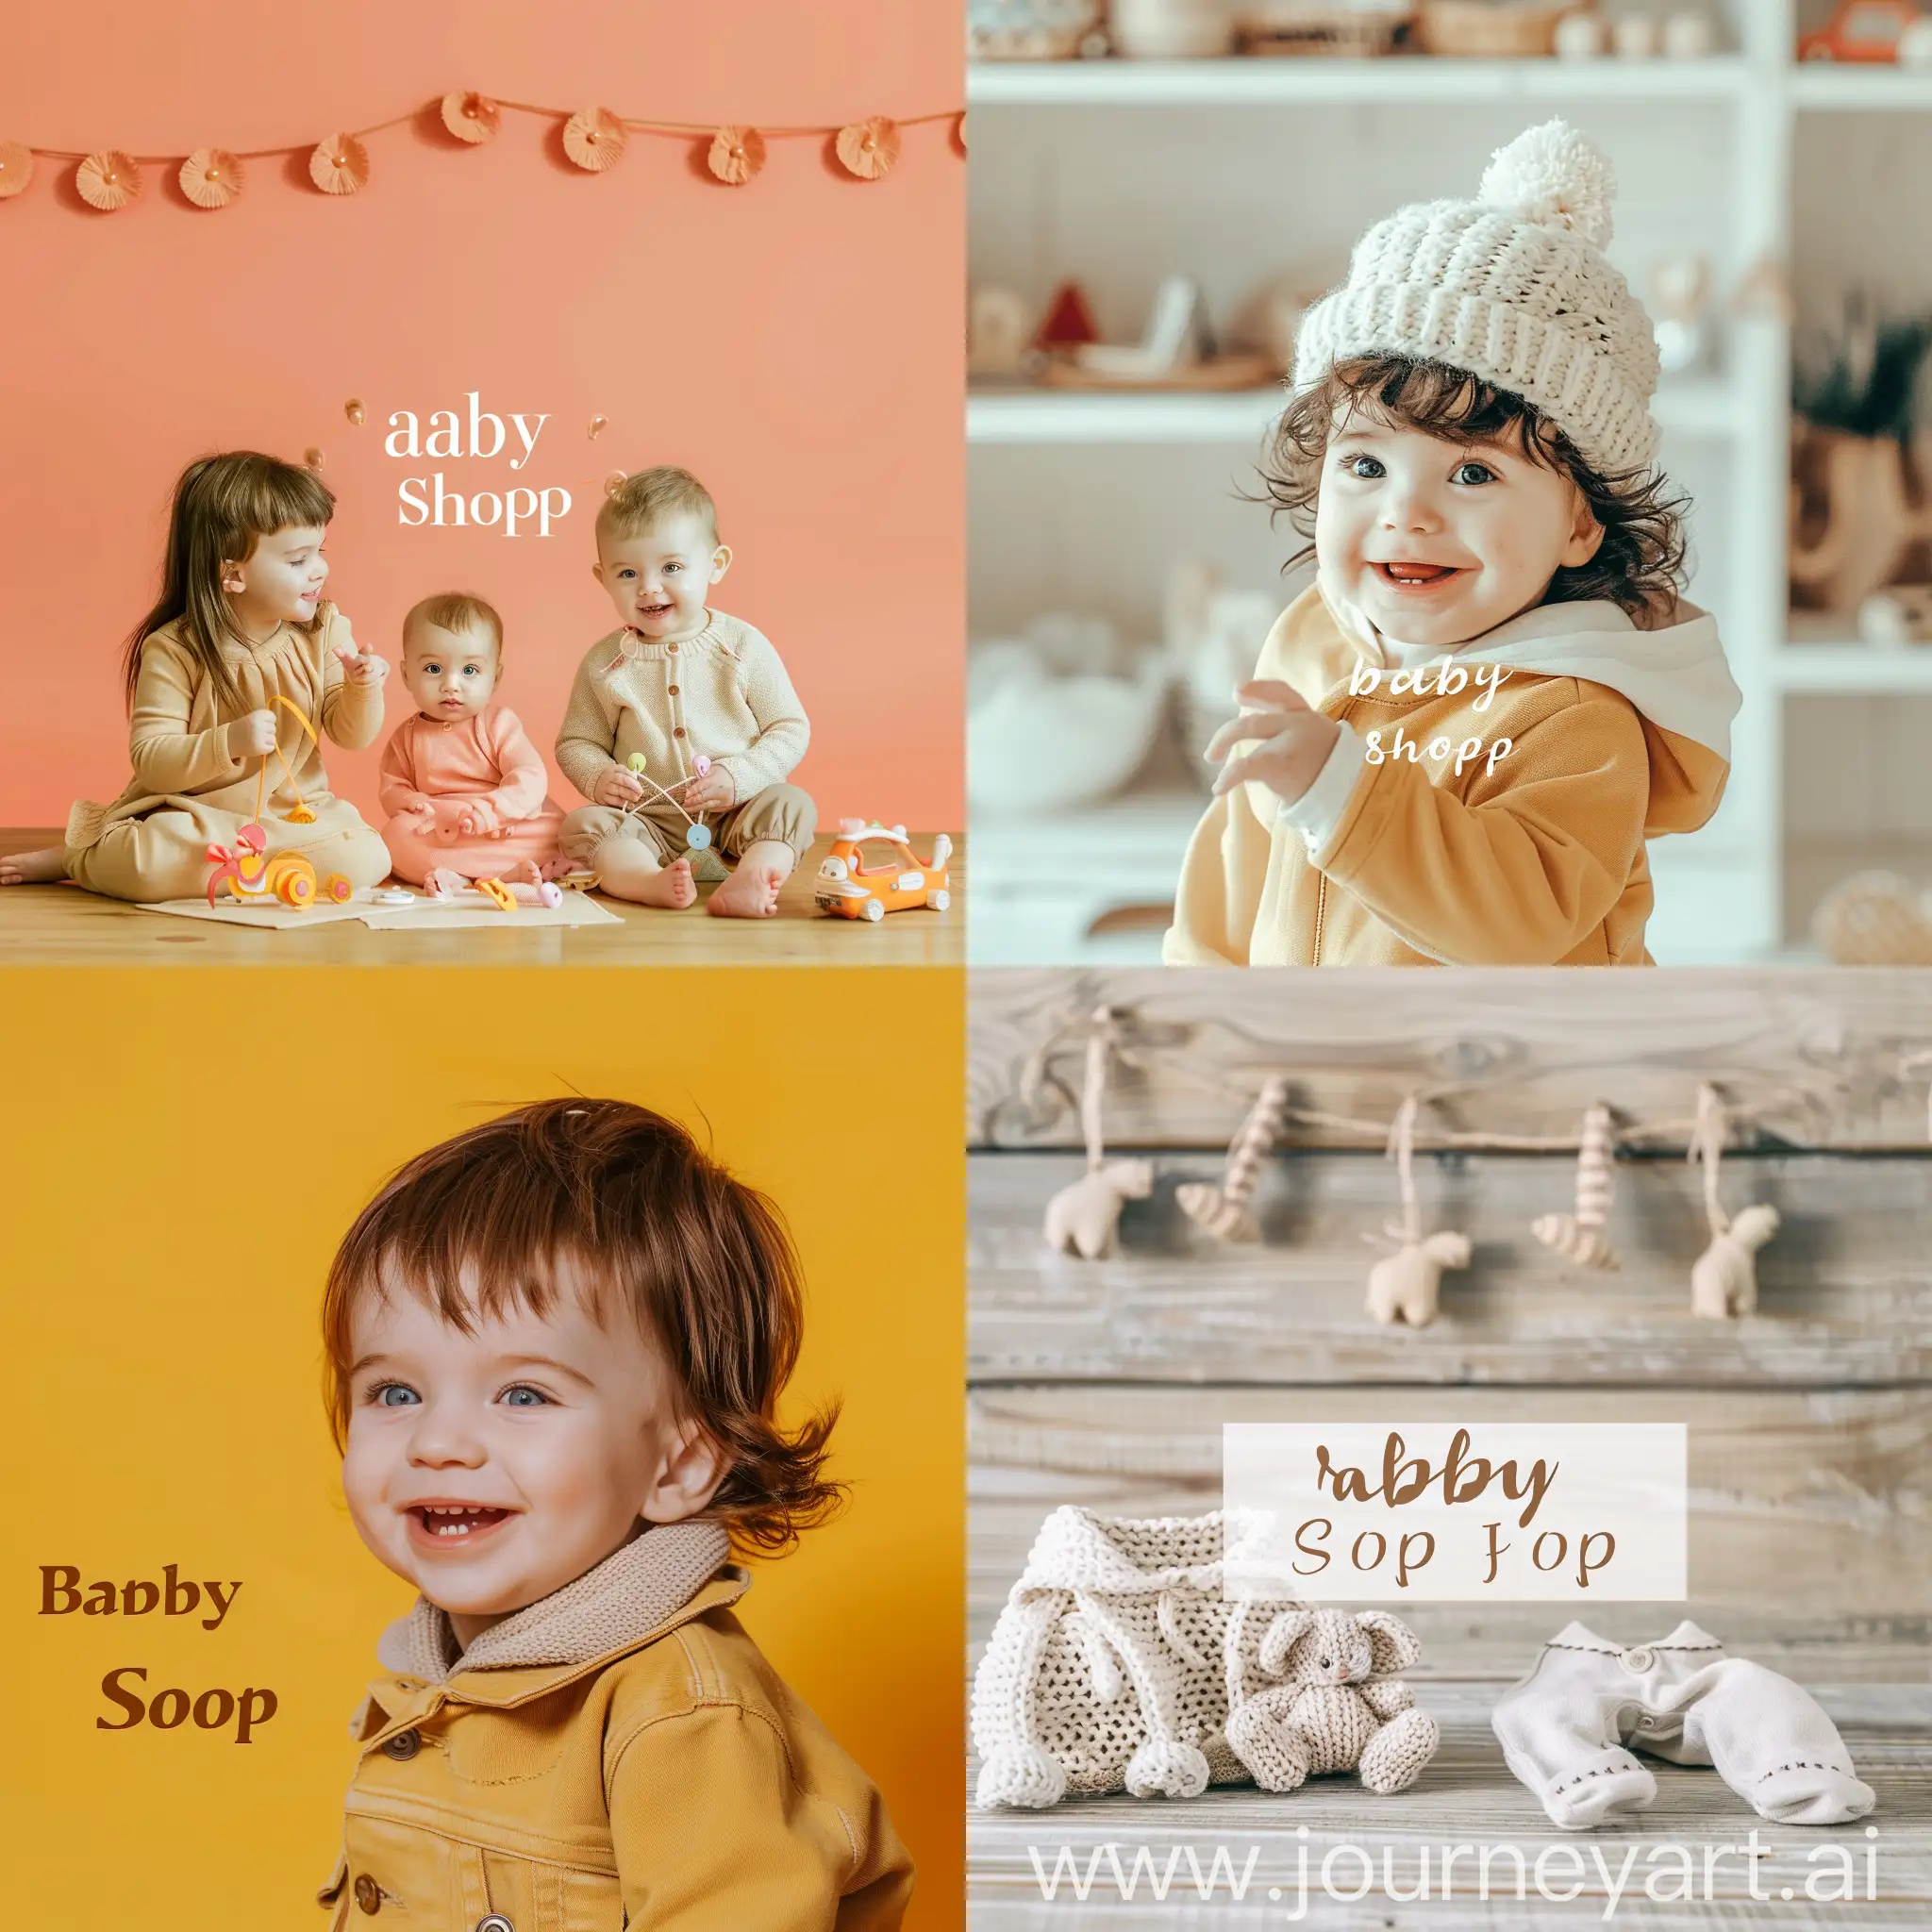 Can you create a photo for online shop for children anf babies and write "baby shop"  in the middle of  photo